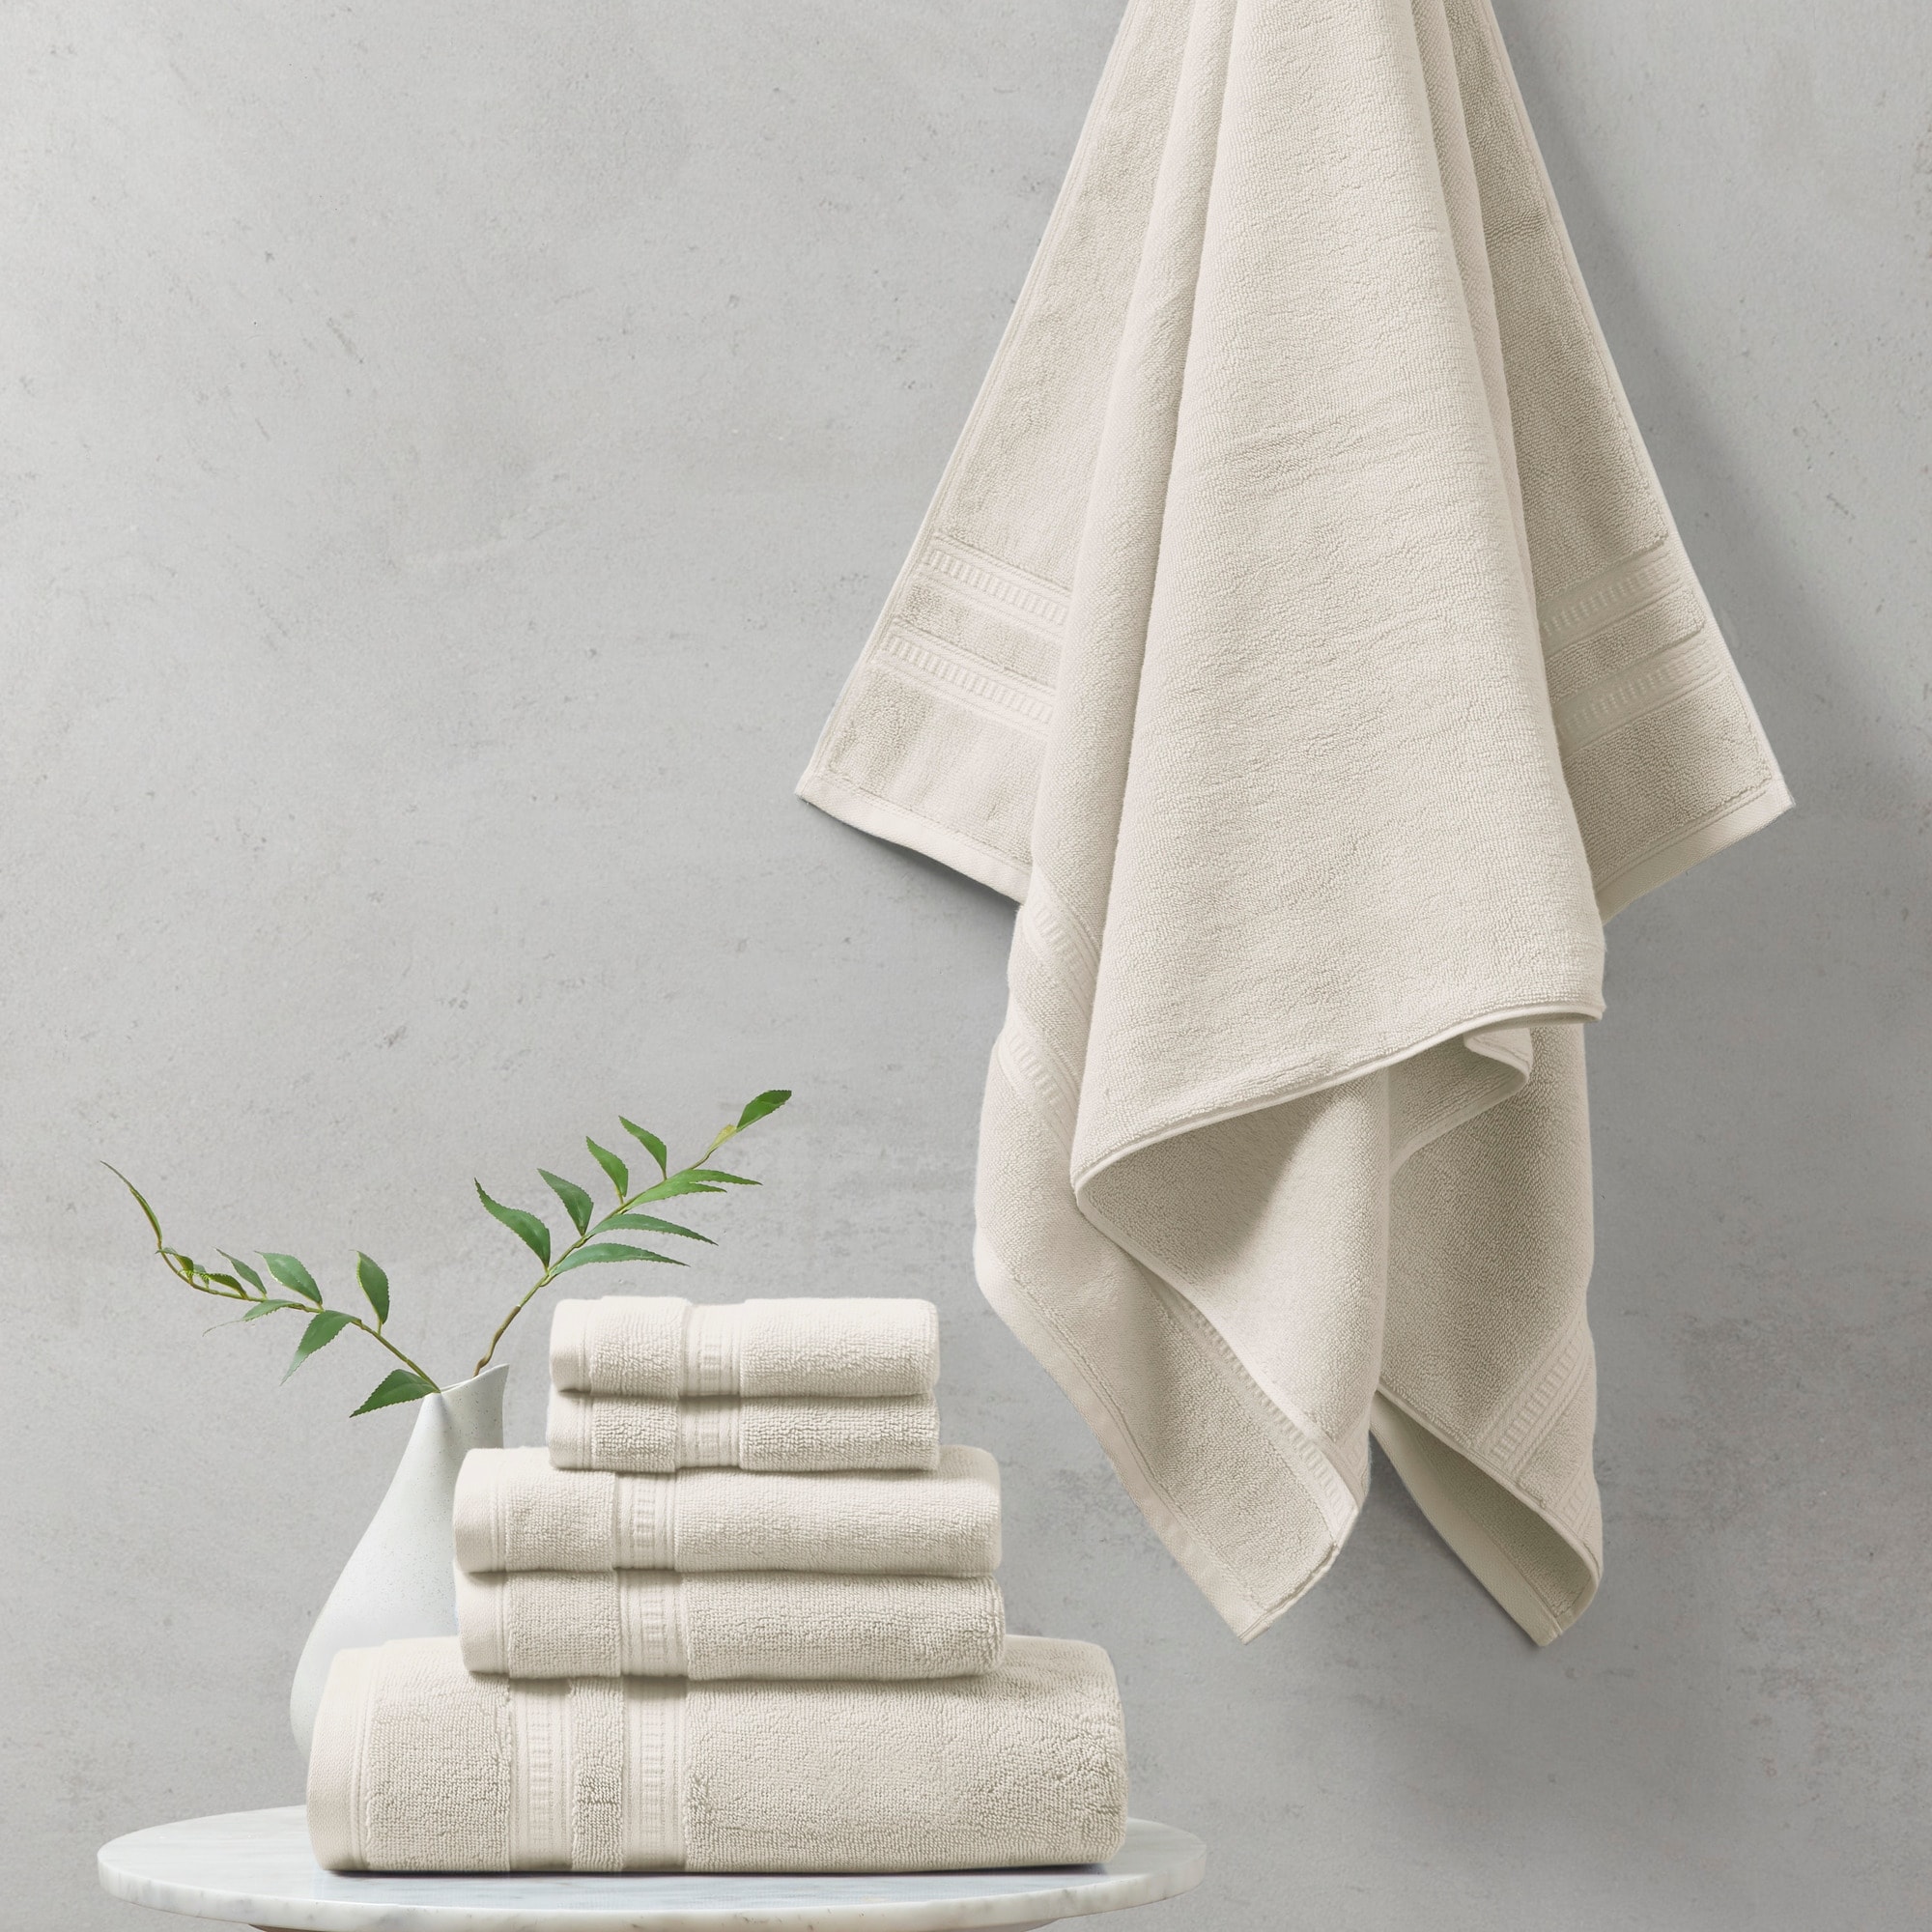 https://ak1.ostkcdn.com/images/products/is/images/direct/ef2ab4d9a7386ff5122b90e8b5682badedde9e52/Plume-100%25-Cotton-Feather-Touch-Antimicrobial-Towel-6-Piece-Set-by-Beautyrest.jpg